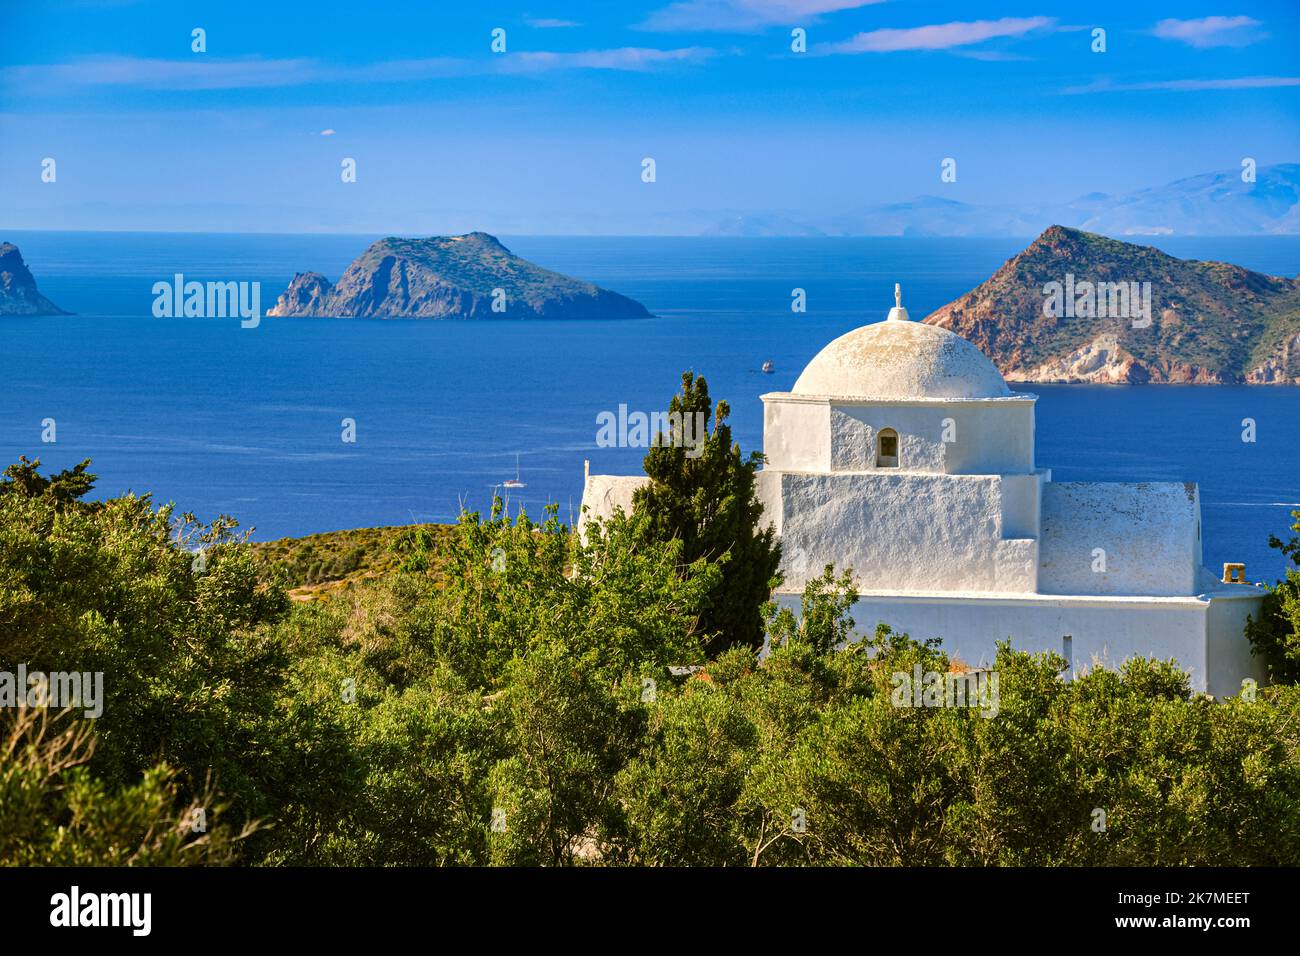 White Greek Orthodox chapel or church on top of hill, clear blue sky, sunny day. Milos, Greece Stock Photo